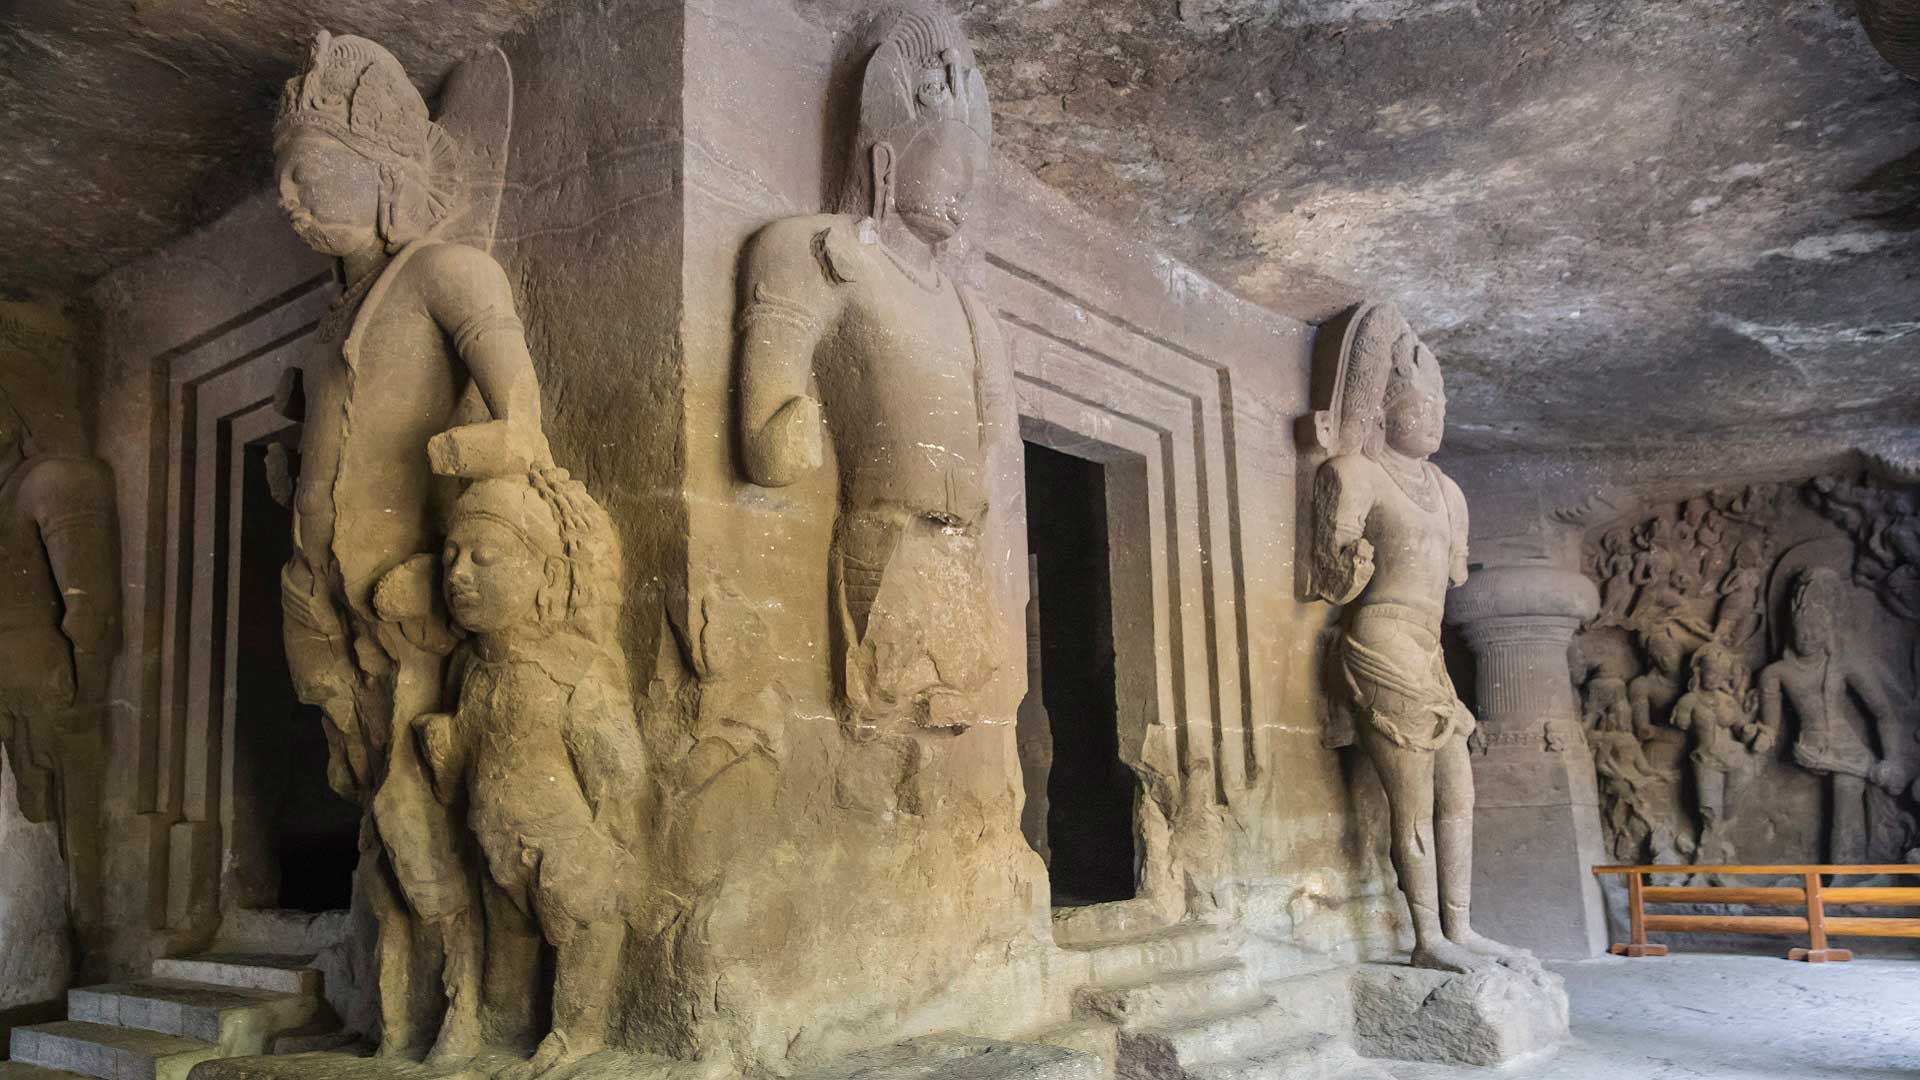 The Elephanta Island cave temples, a Unesco World Heritage Site, in Mumbai, India with GeoEx.